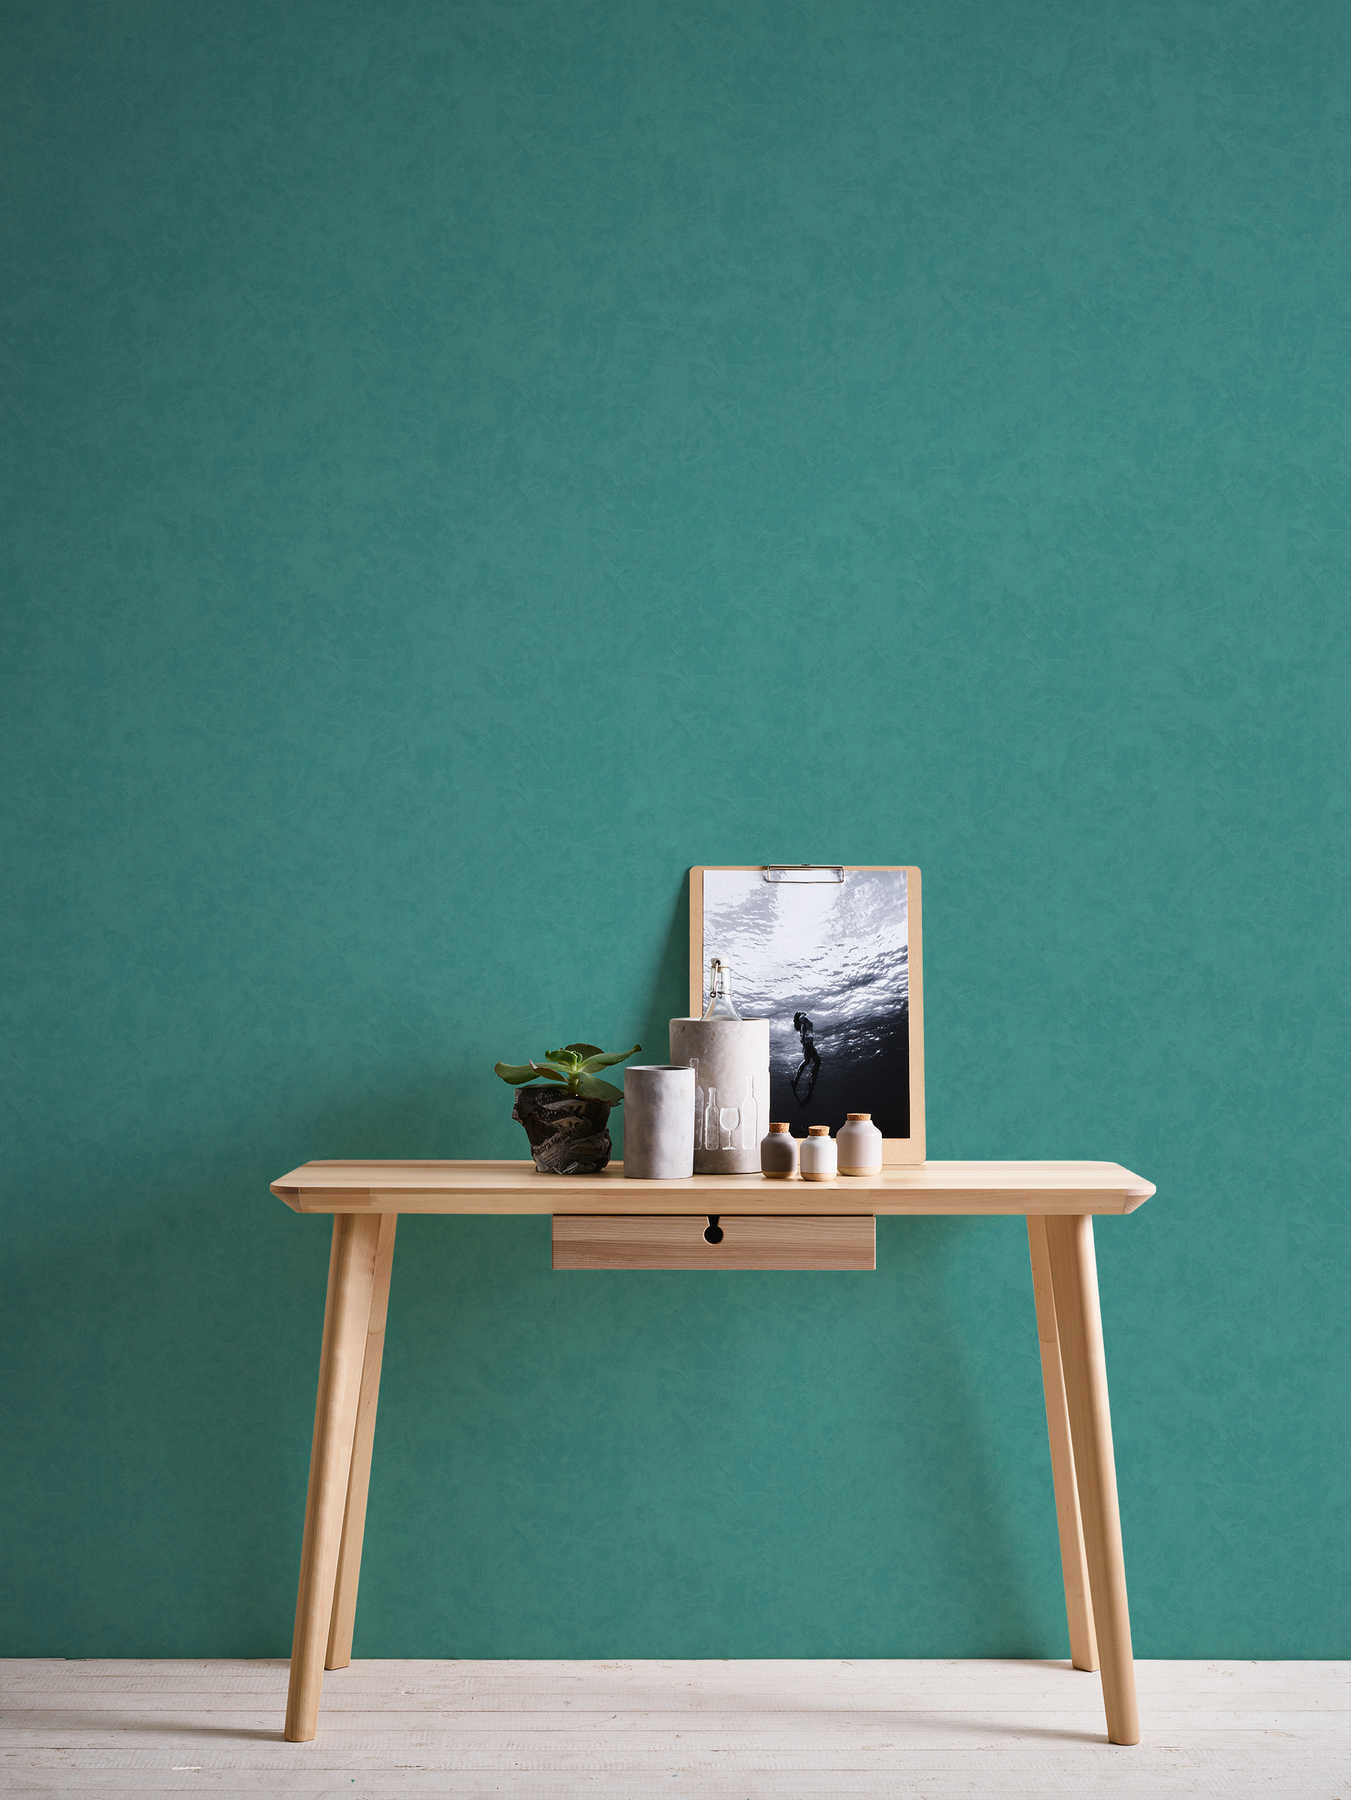             Non-woven wallpaper plaster look & texture pattern - petrol, turquoise
        